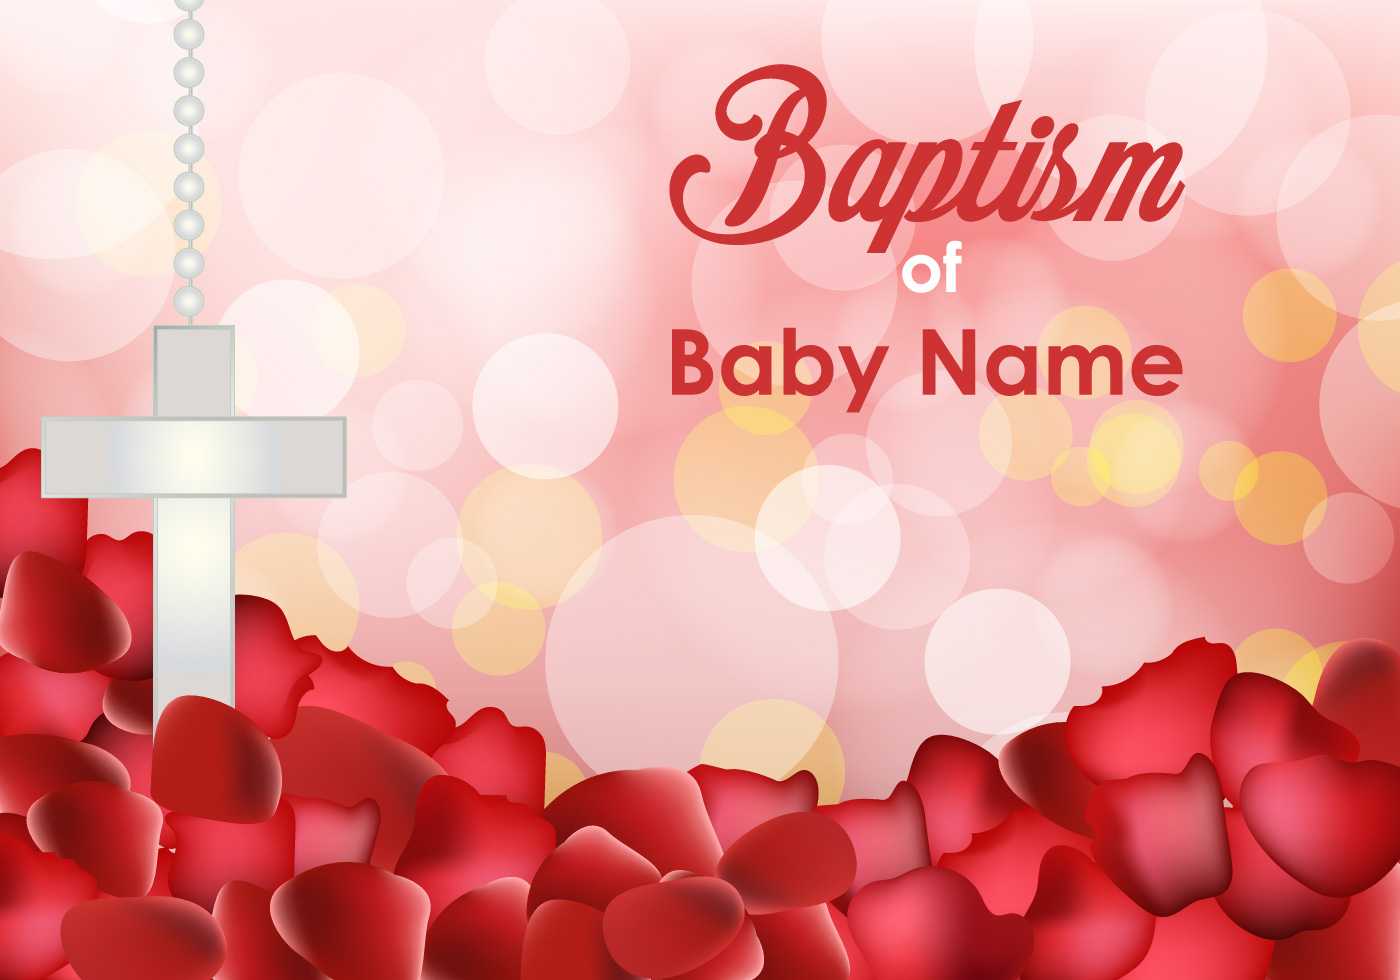 Baptism Invitation Templates – Download Free Vectors Within Free Christening Invitation Cards Templates